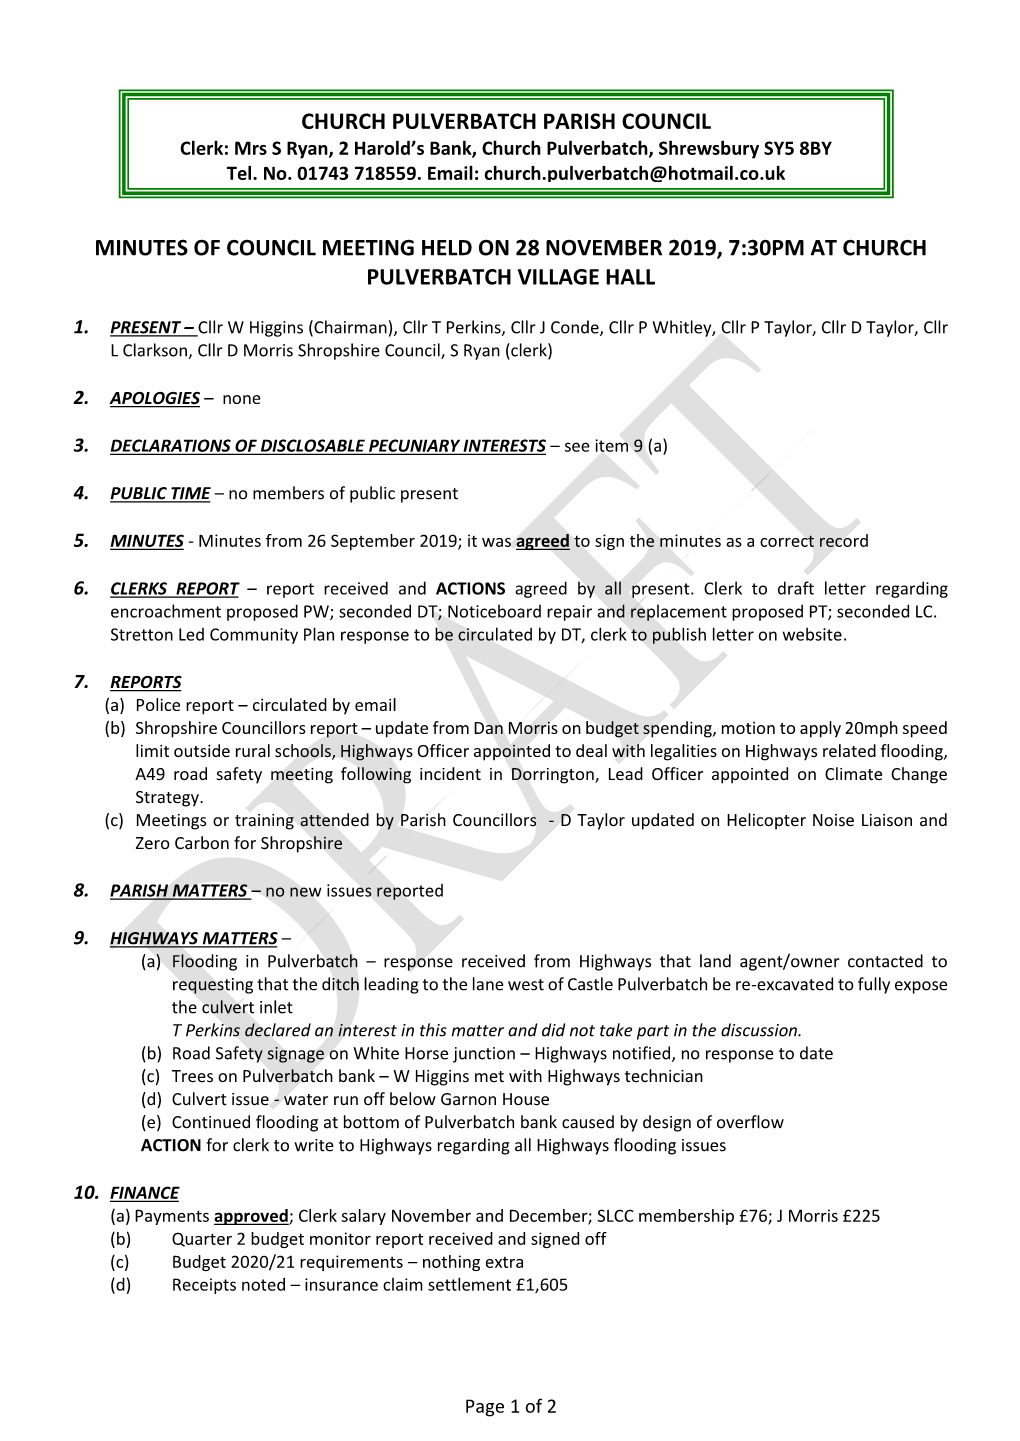 Minutes of Council Meeting Held on 28 November 2019, 7:30Pm at Church Pulverbatch Village Hall